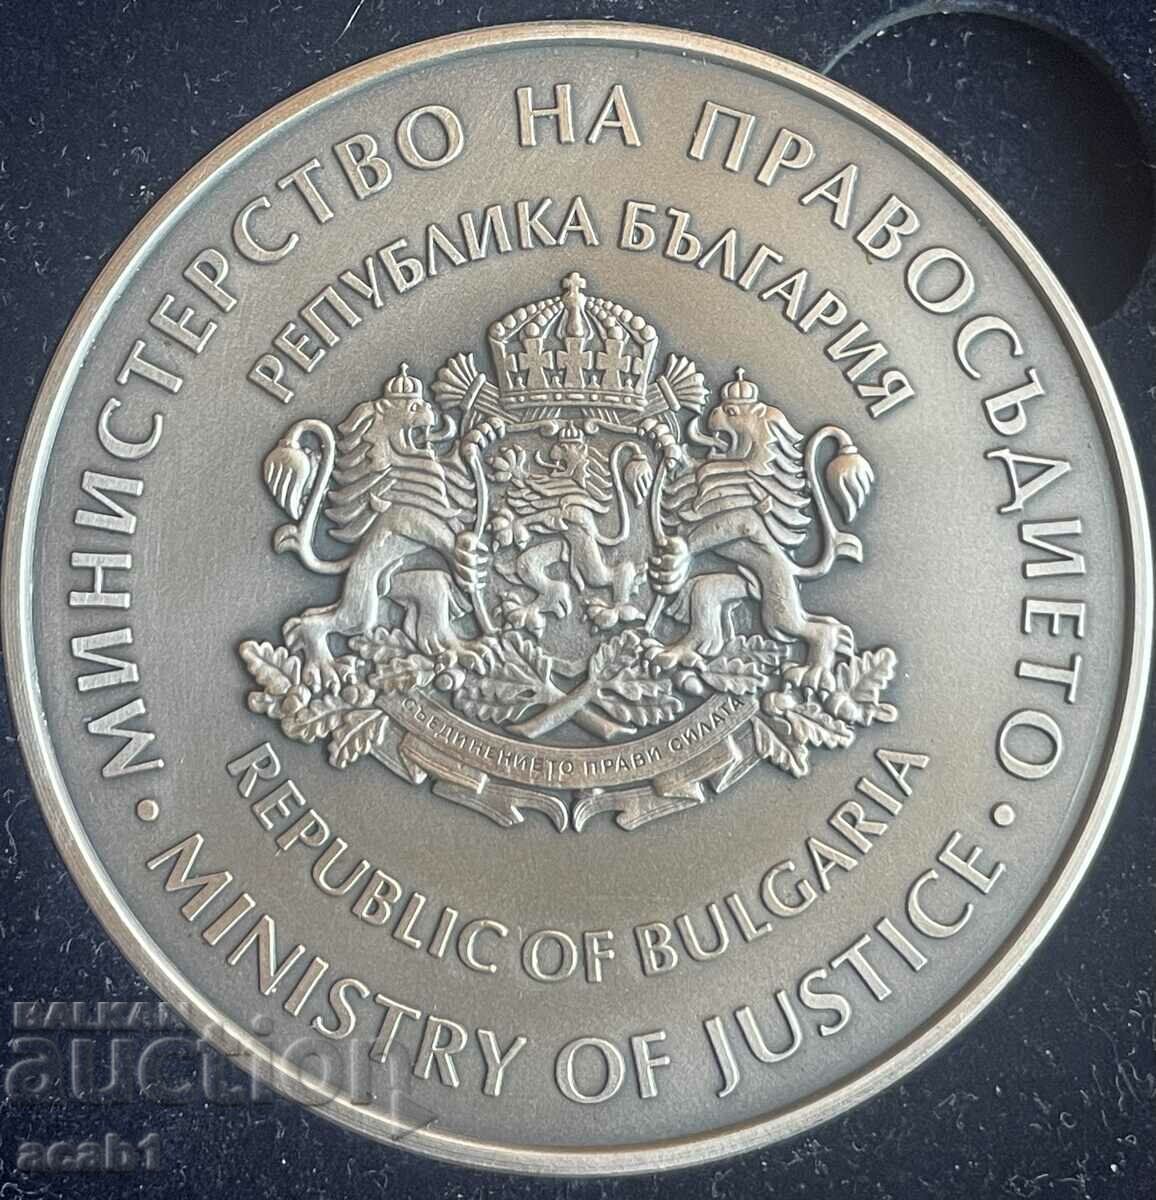 Plaque Ministry of Justice